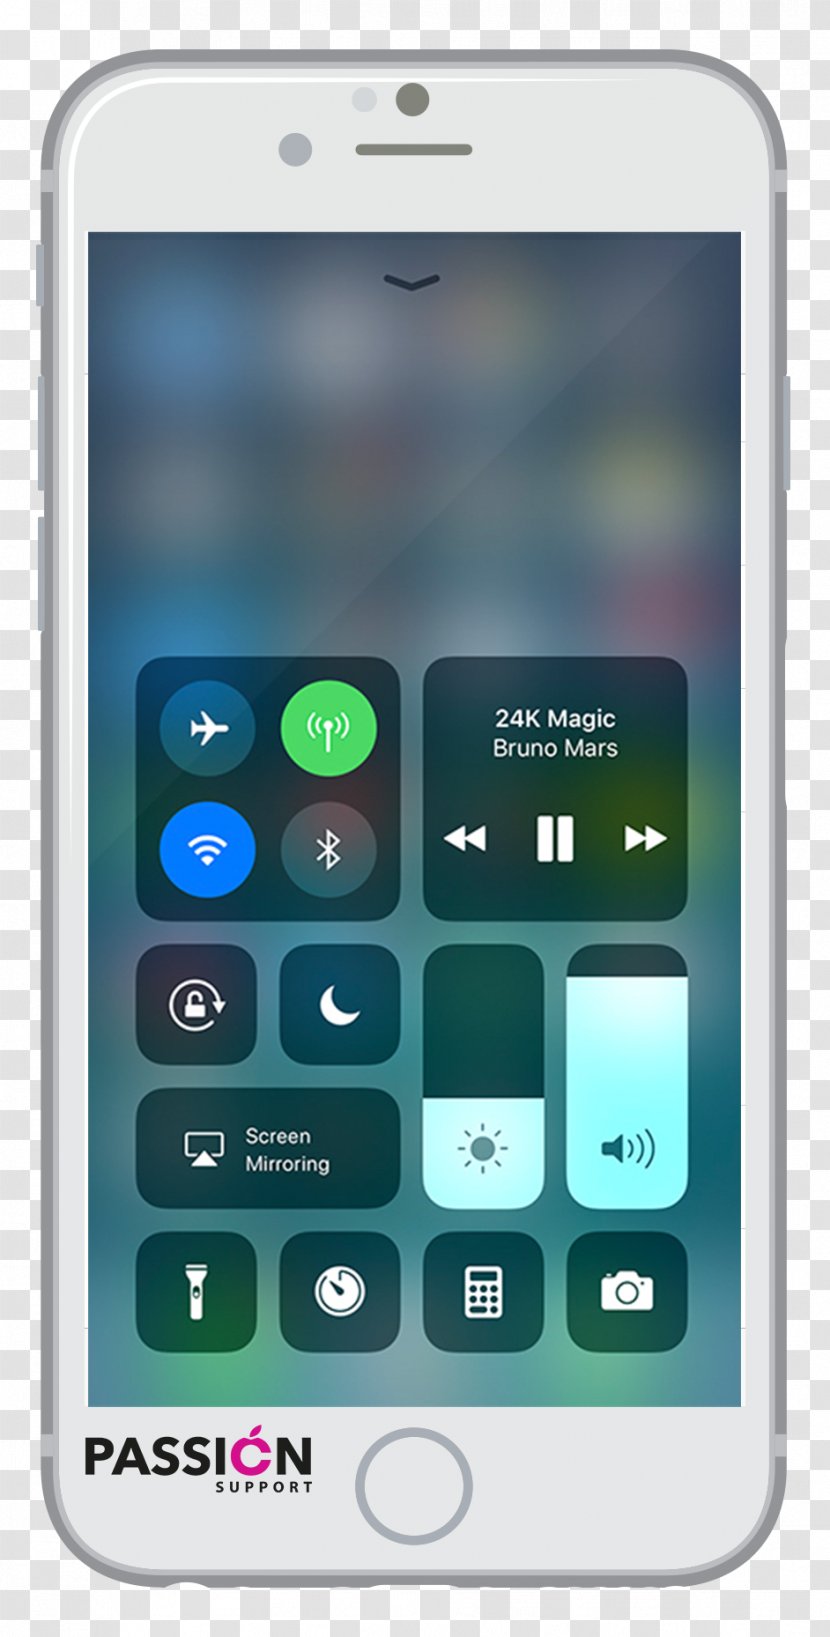 IPhone X Apple IPod Nano (7th Generation) Touch IOS 11 - Ipod 7th Generation - Control Center Transparent PNG